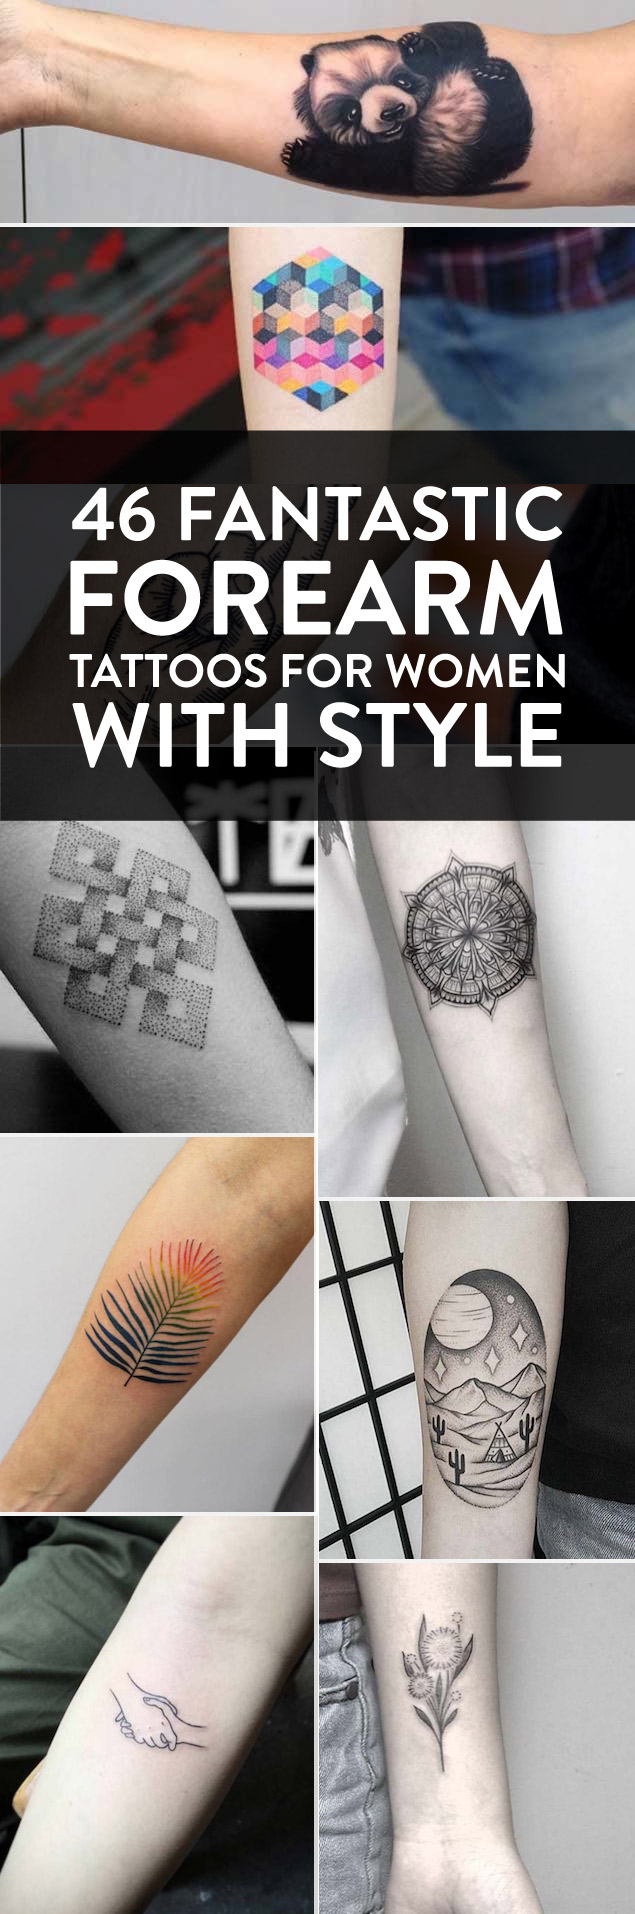 46 Fantastic Forearm Tattoos for Women With Style | TattooBlnd